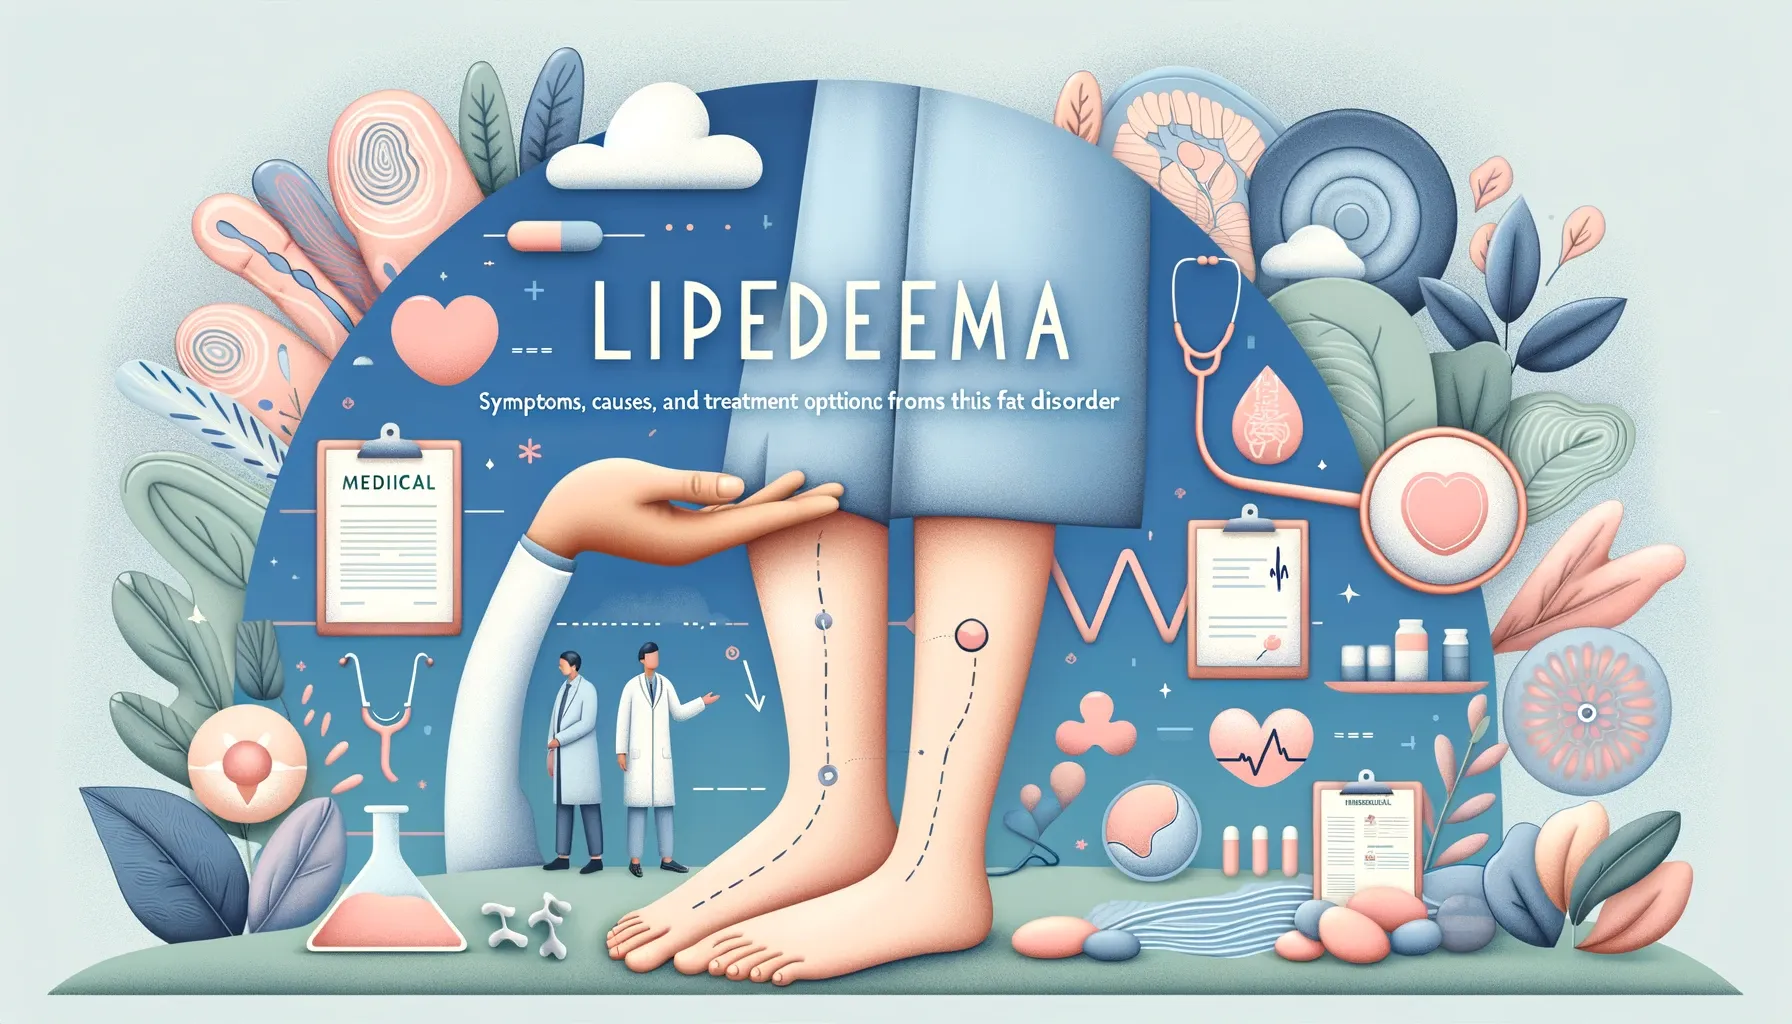 Lipedema: Symptoms, Causes, and Treatment Options for This Fat Disorder